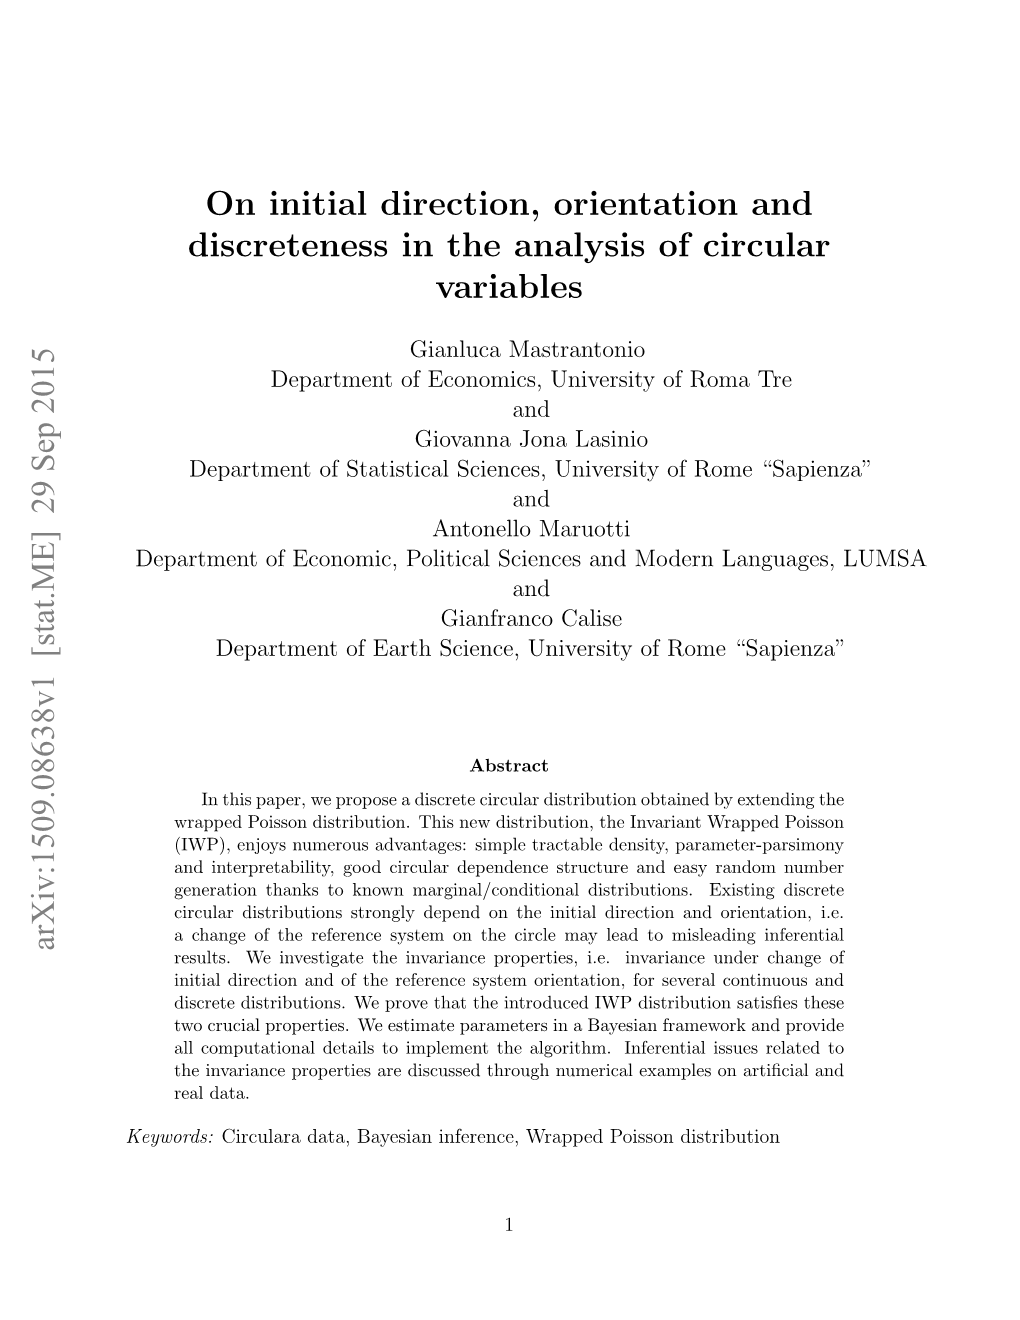 On Initial Direction, Orientation and Discreteness in the Analysis of Circular Variables